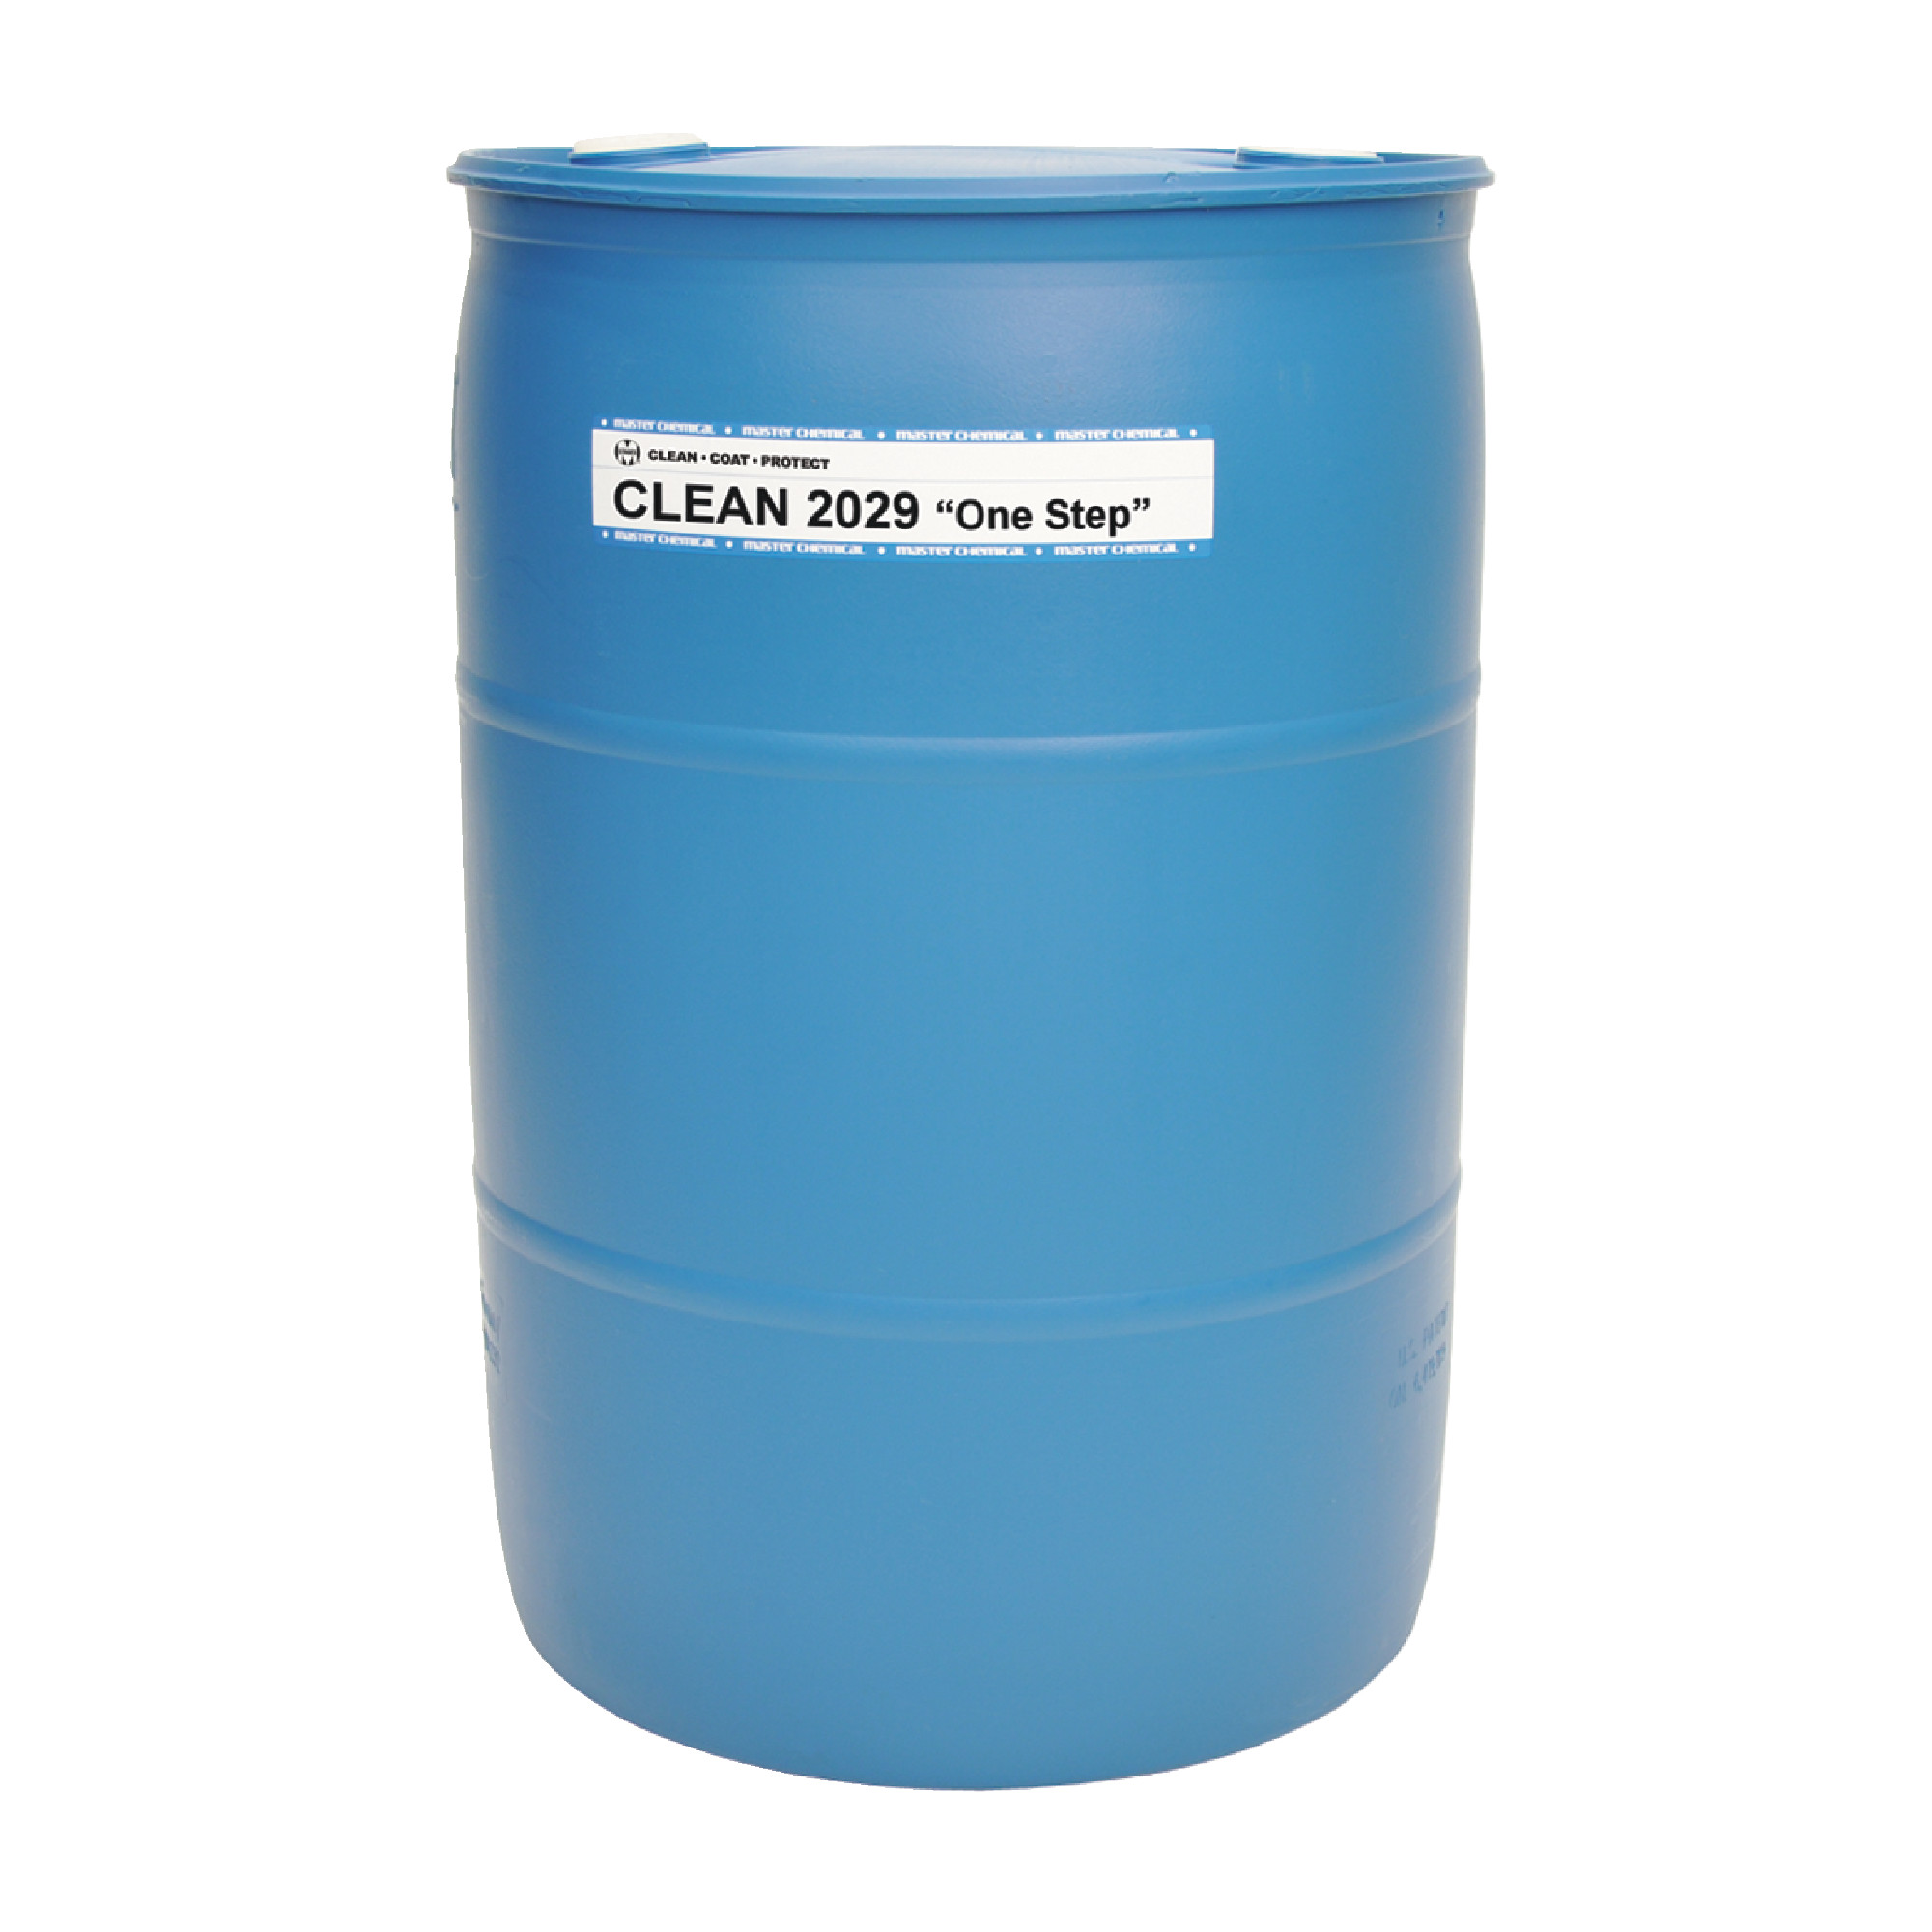 Master STAGES&#8482; CLEAN 2029 "One Step" 54 Gallon Parts Washing Fluid with Corrosion Inhibitor